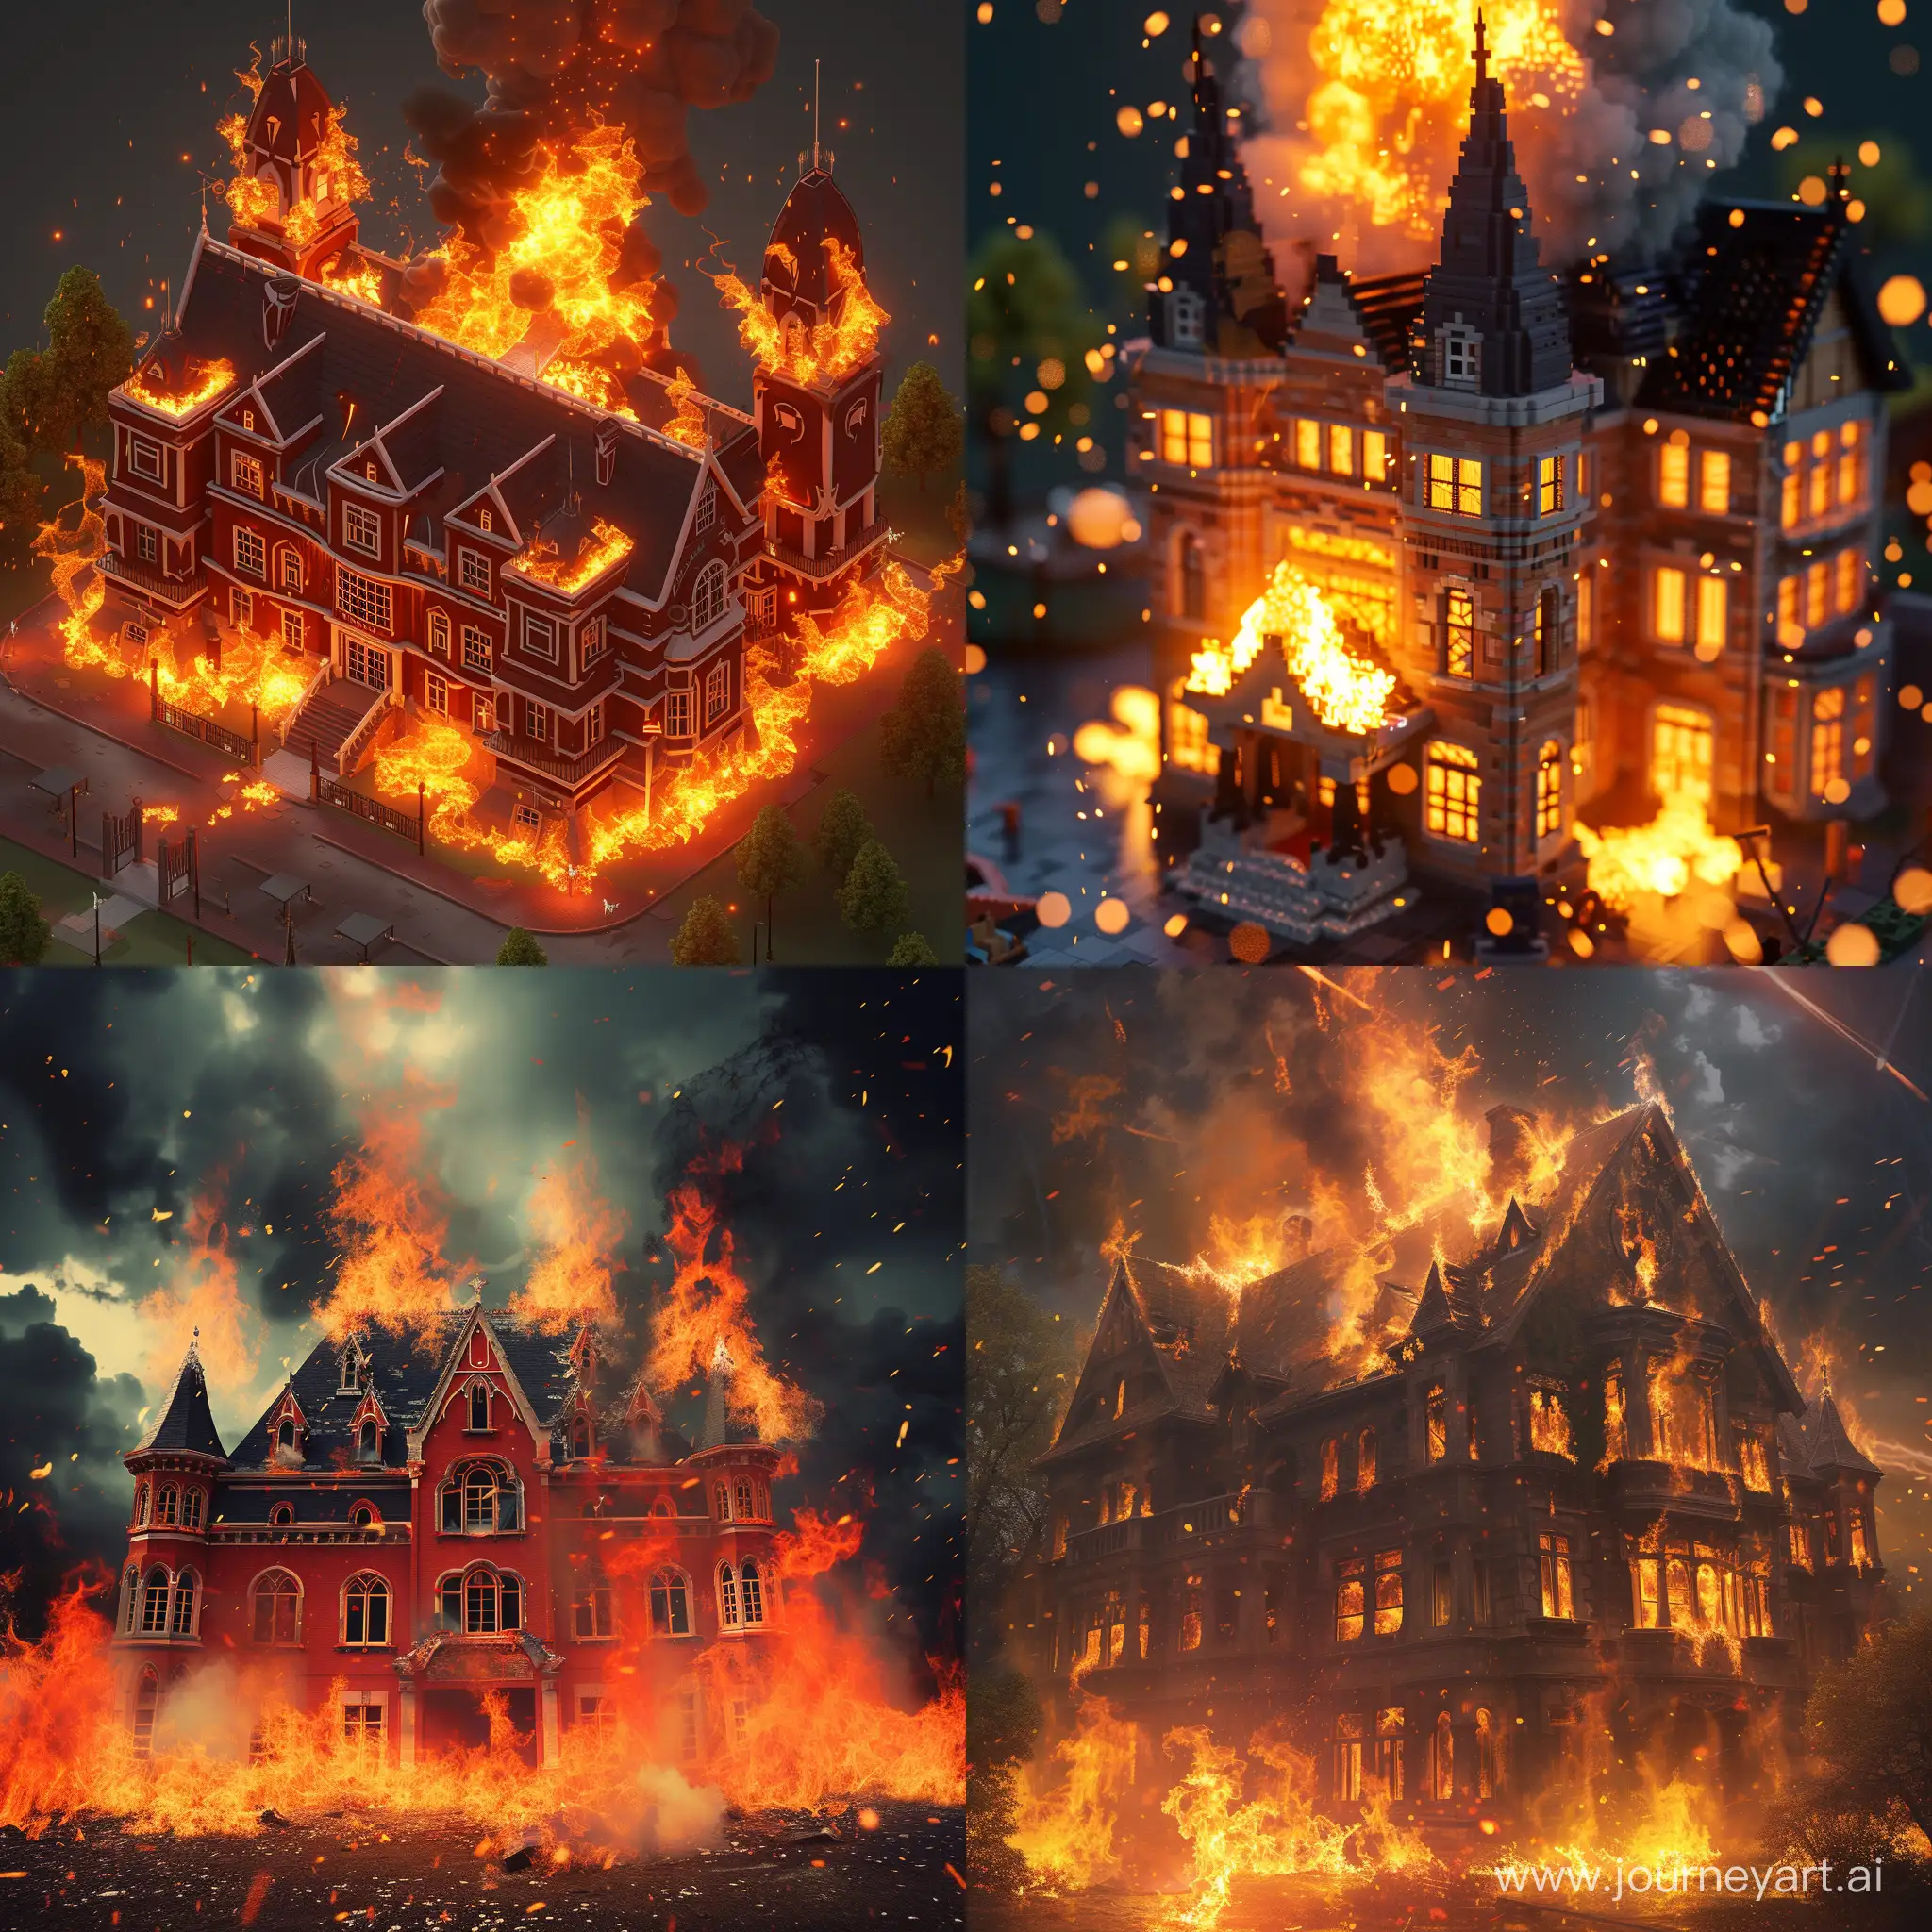 Imaginary school with fiery elements